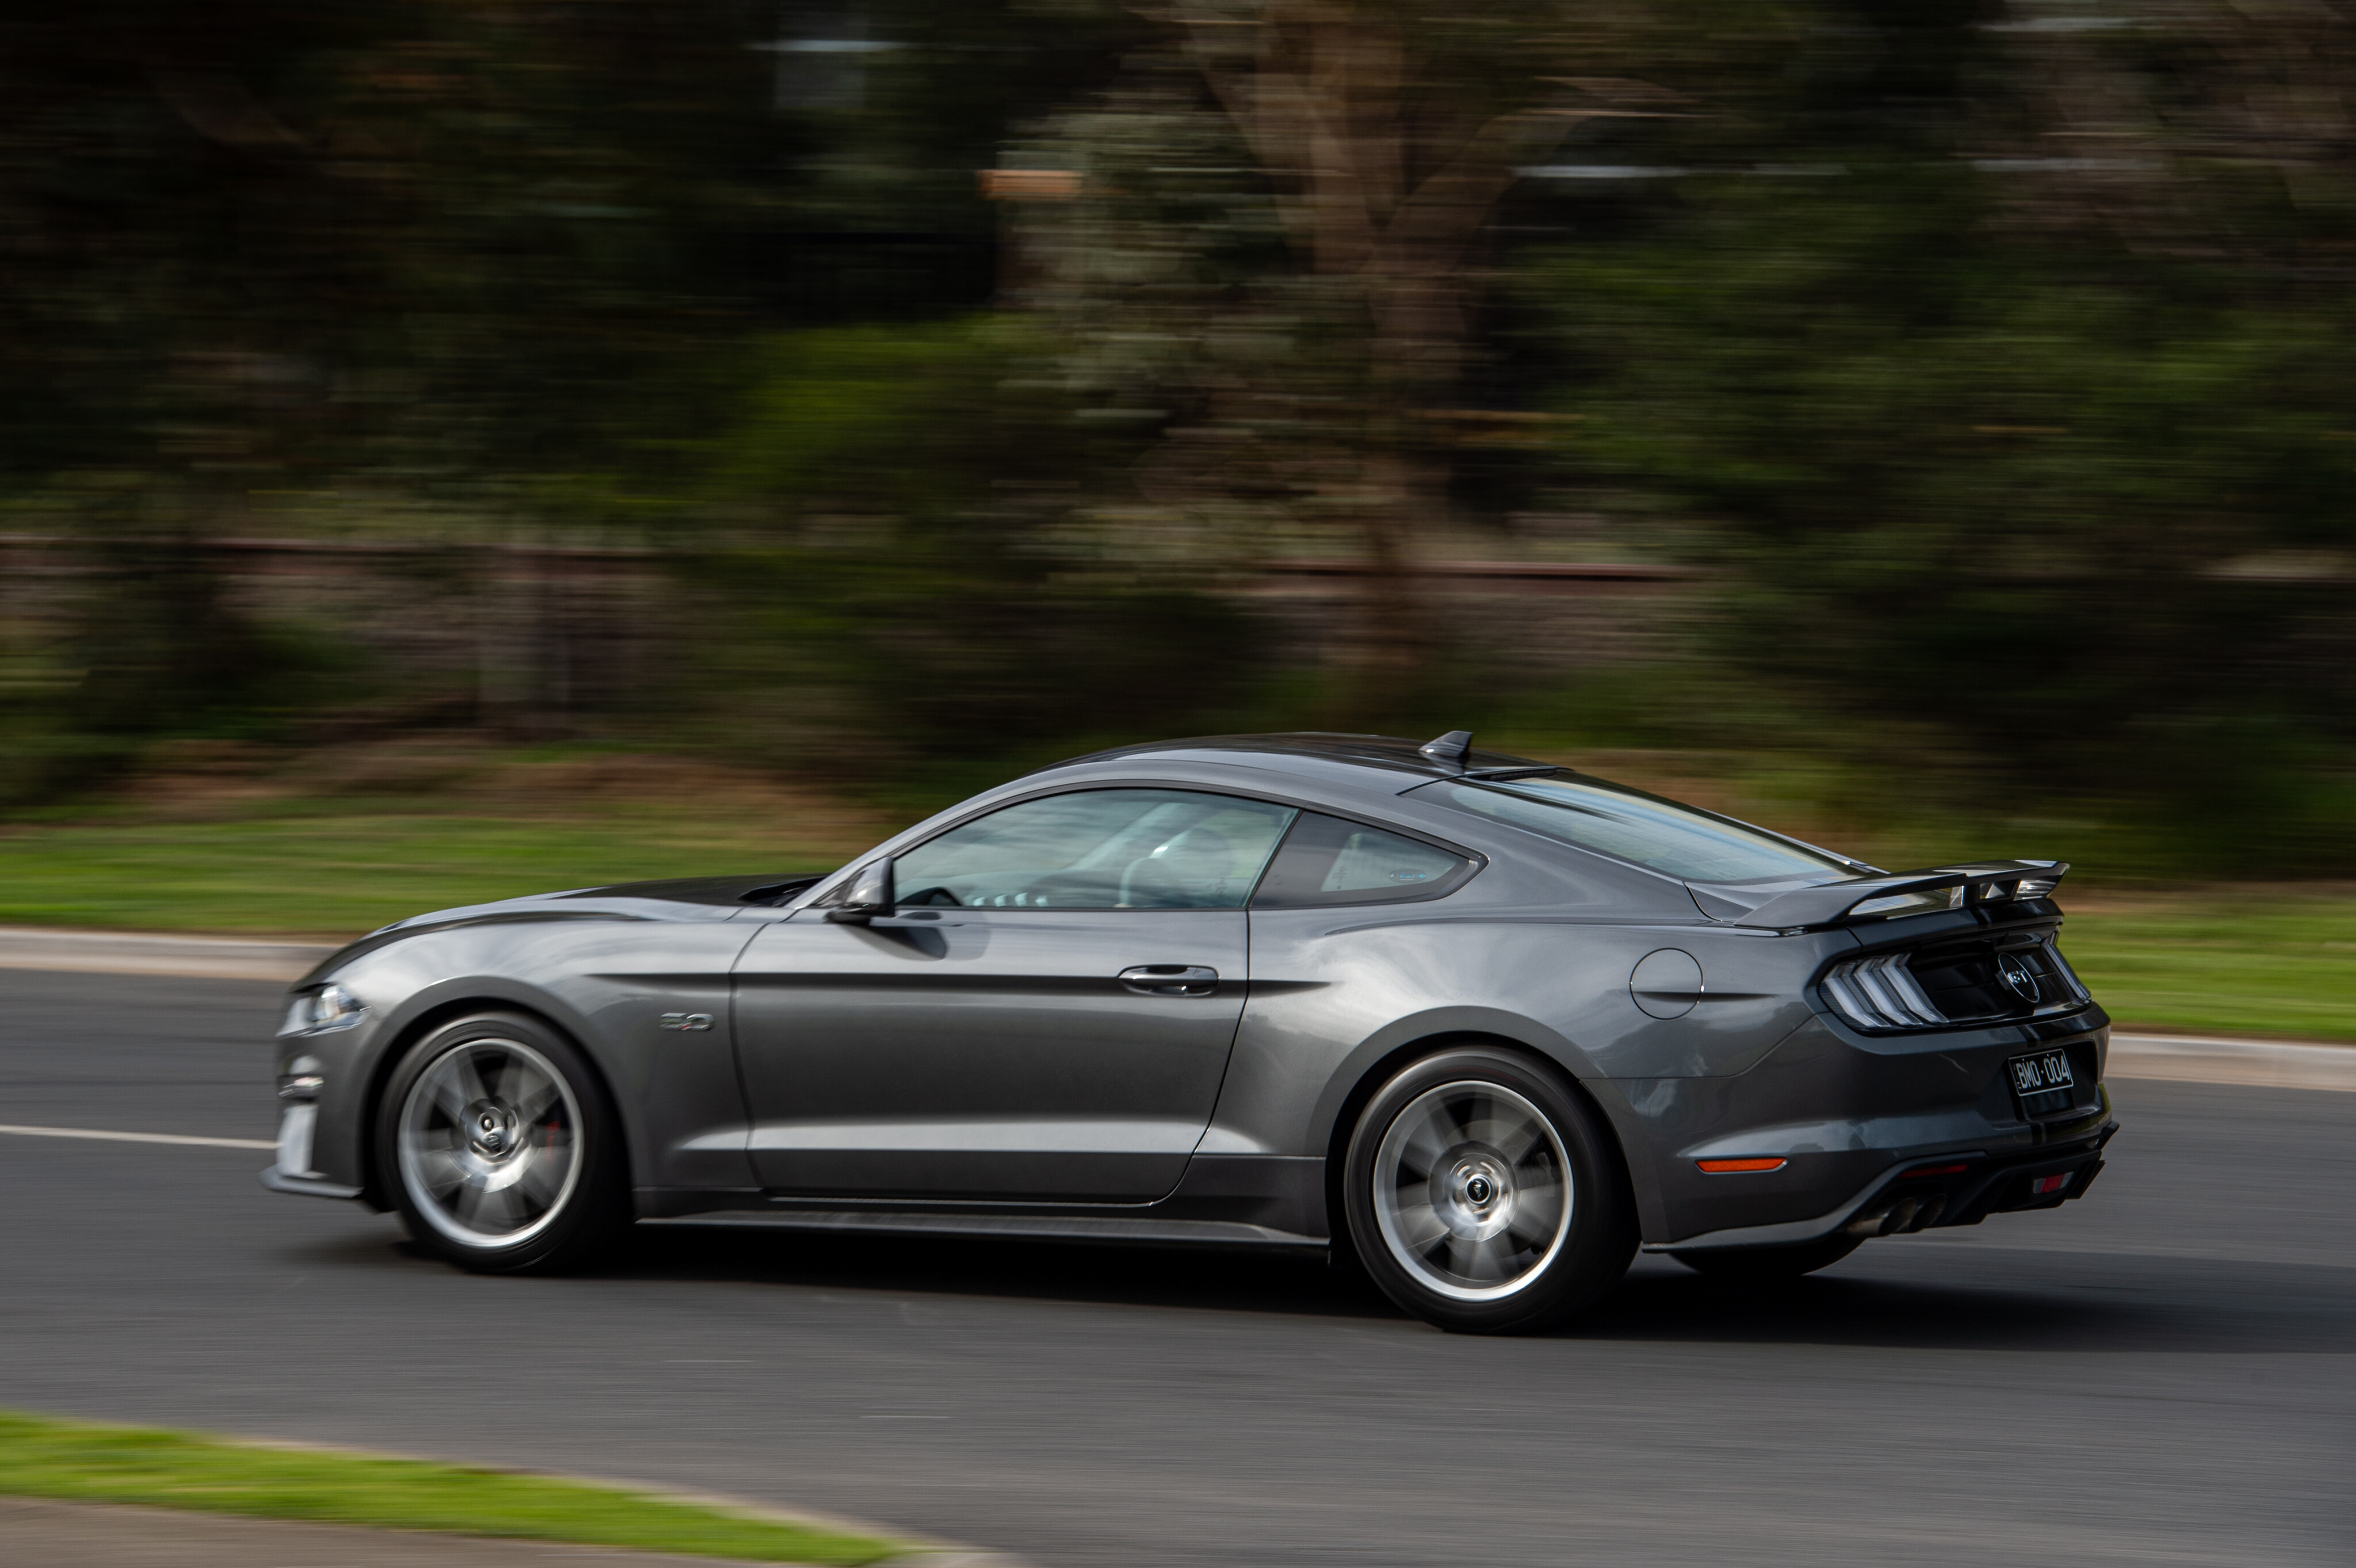 c17c0a52/2021 ford mustang gt auto left rear side panning jpg